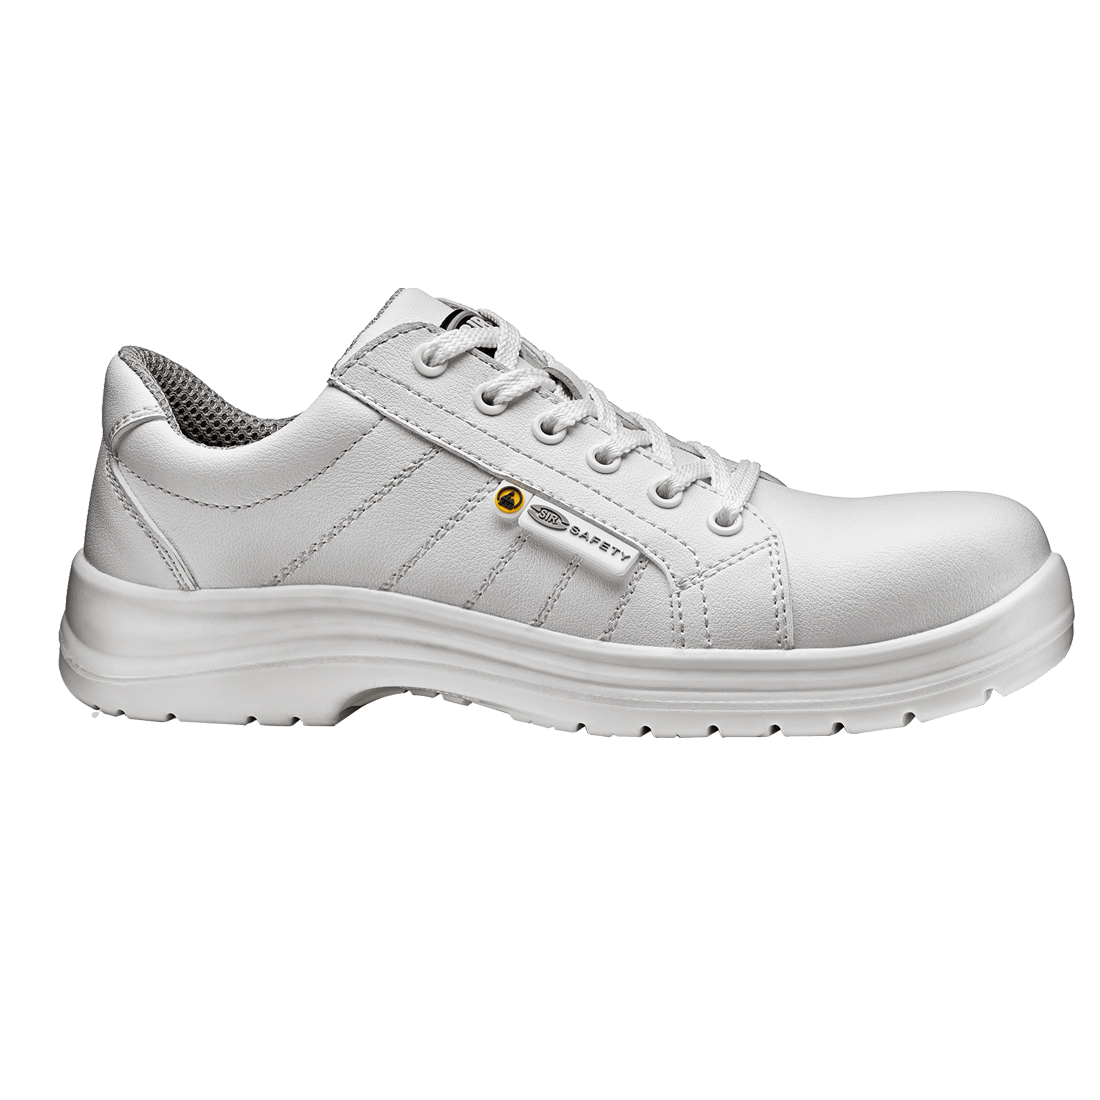 WHITE FOBIA LOW SHOE | Safety System Sir